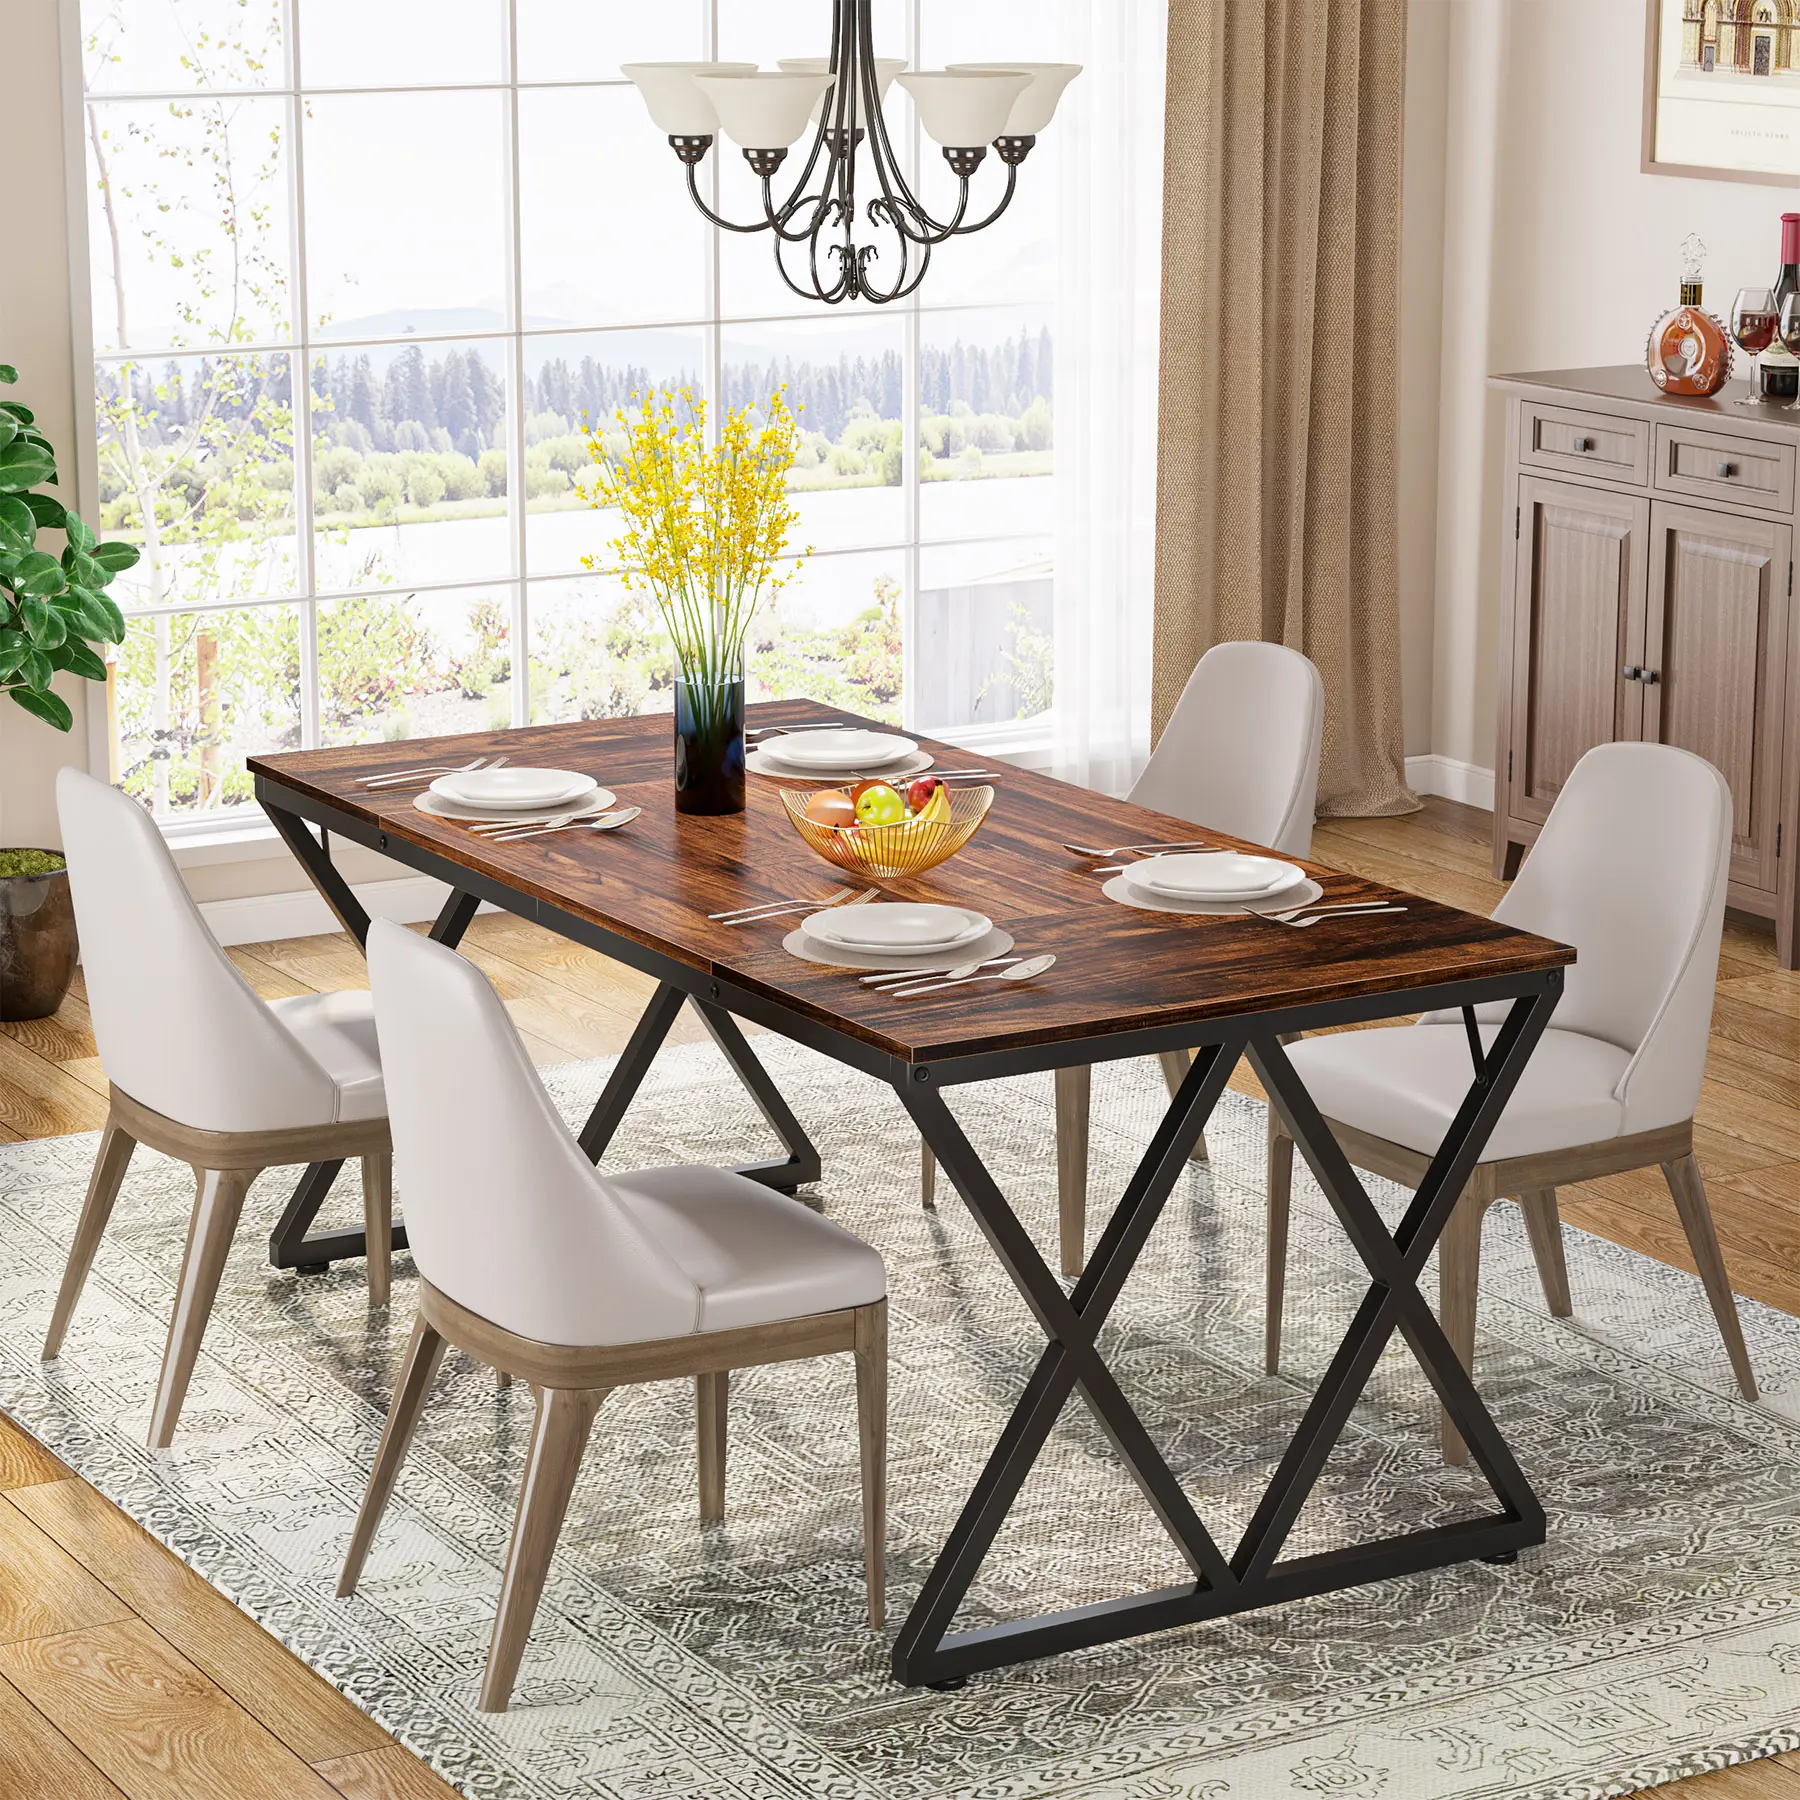 Ultra Modern Square Wood Restaurant Dining Table Modern Table For Dining Room